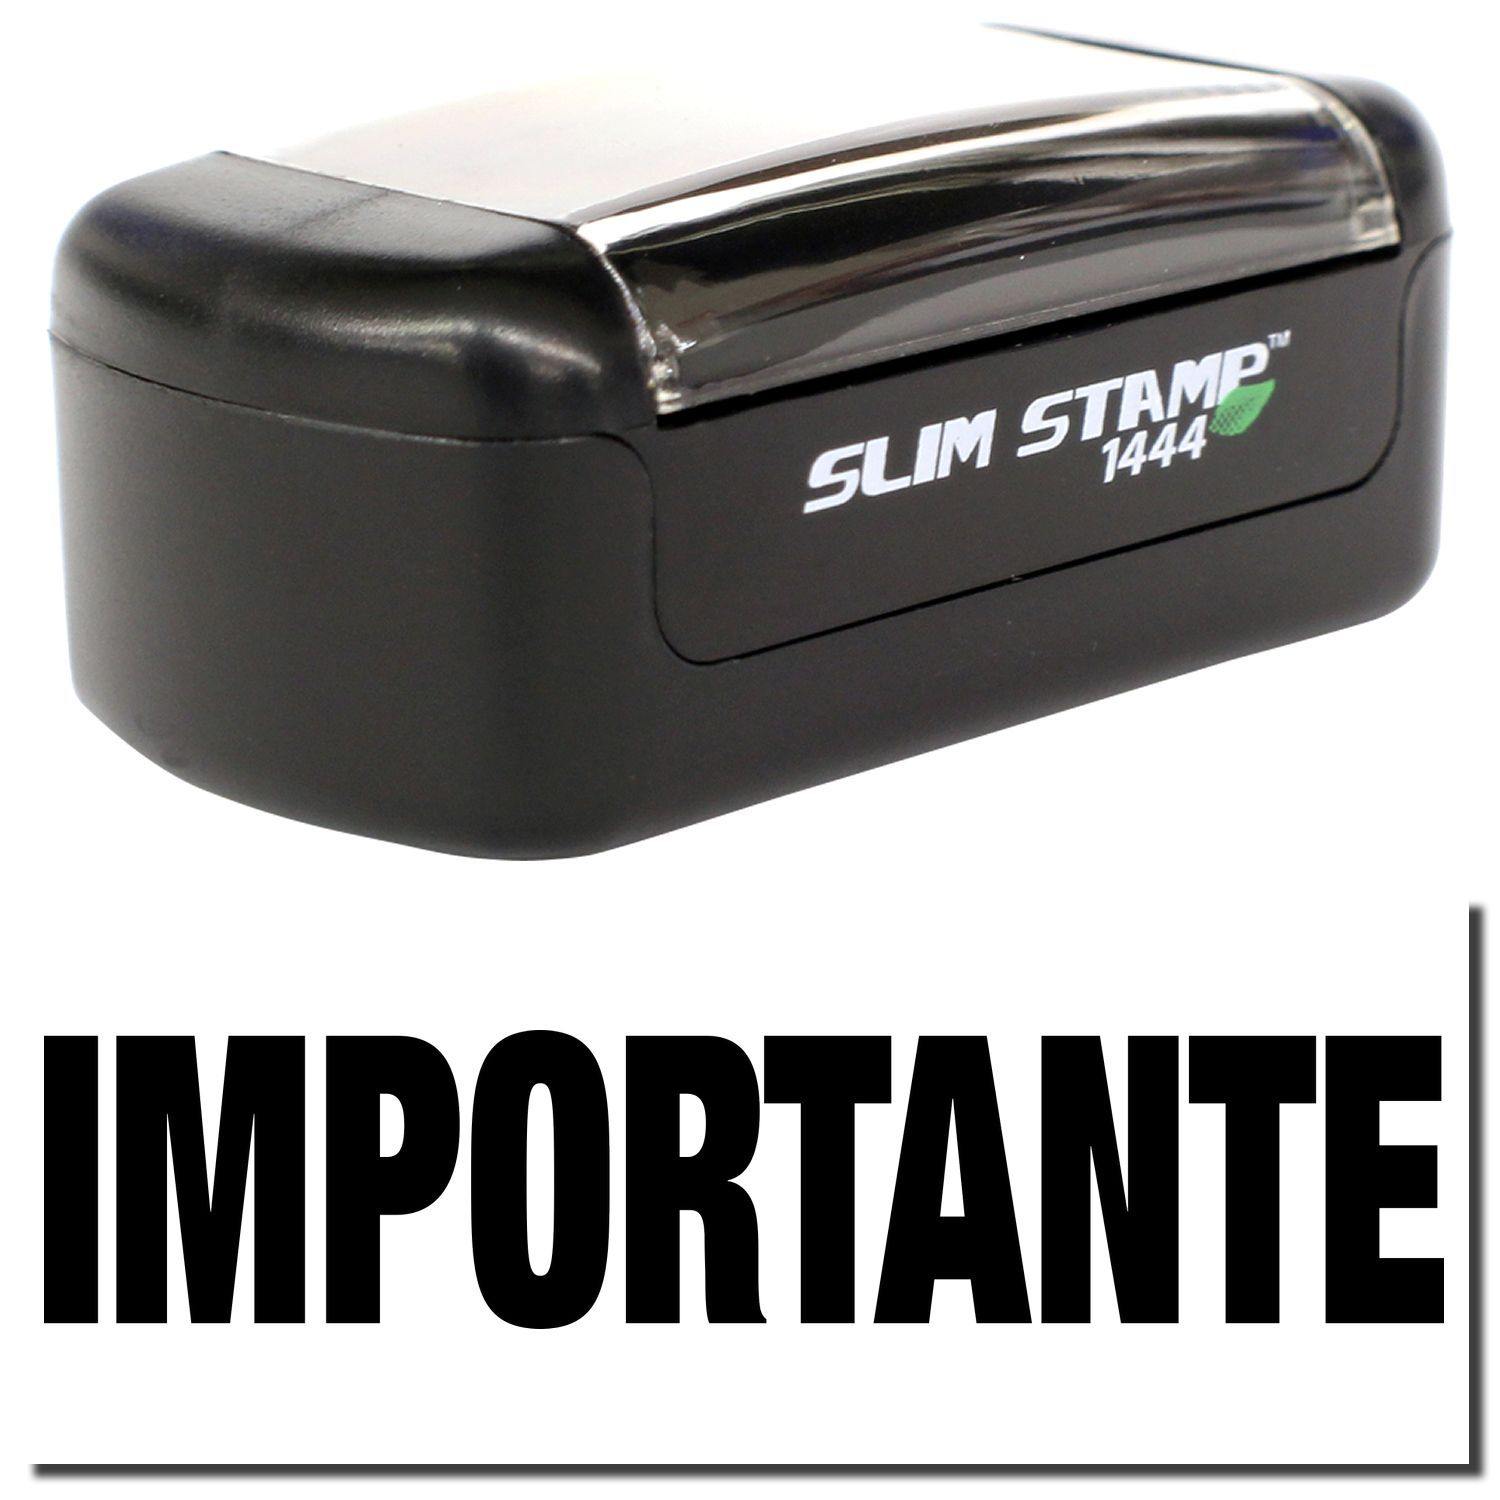 A stock office pre-inked stamp with a stamped image showing how the text "IMPORTANTE" is displayed after stamping.